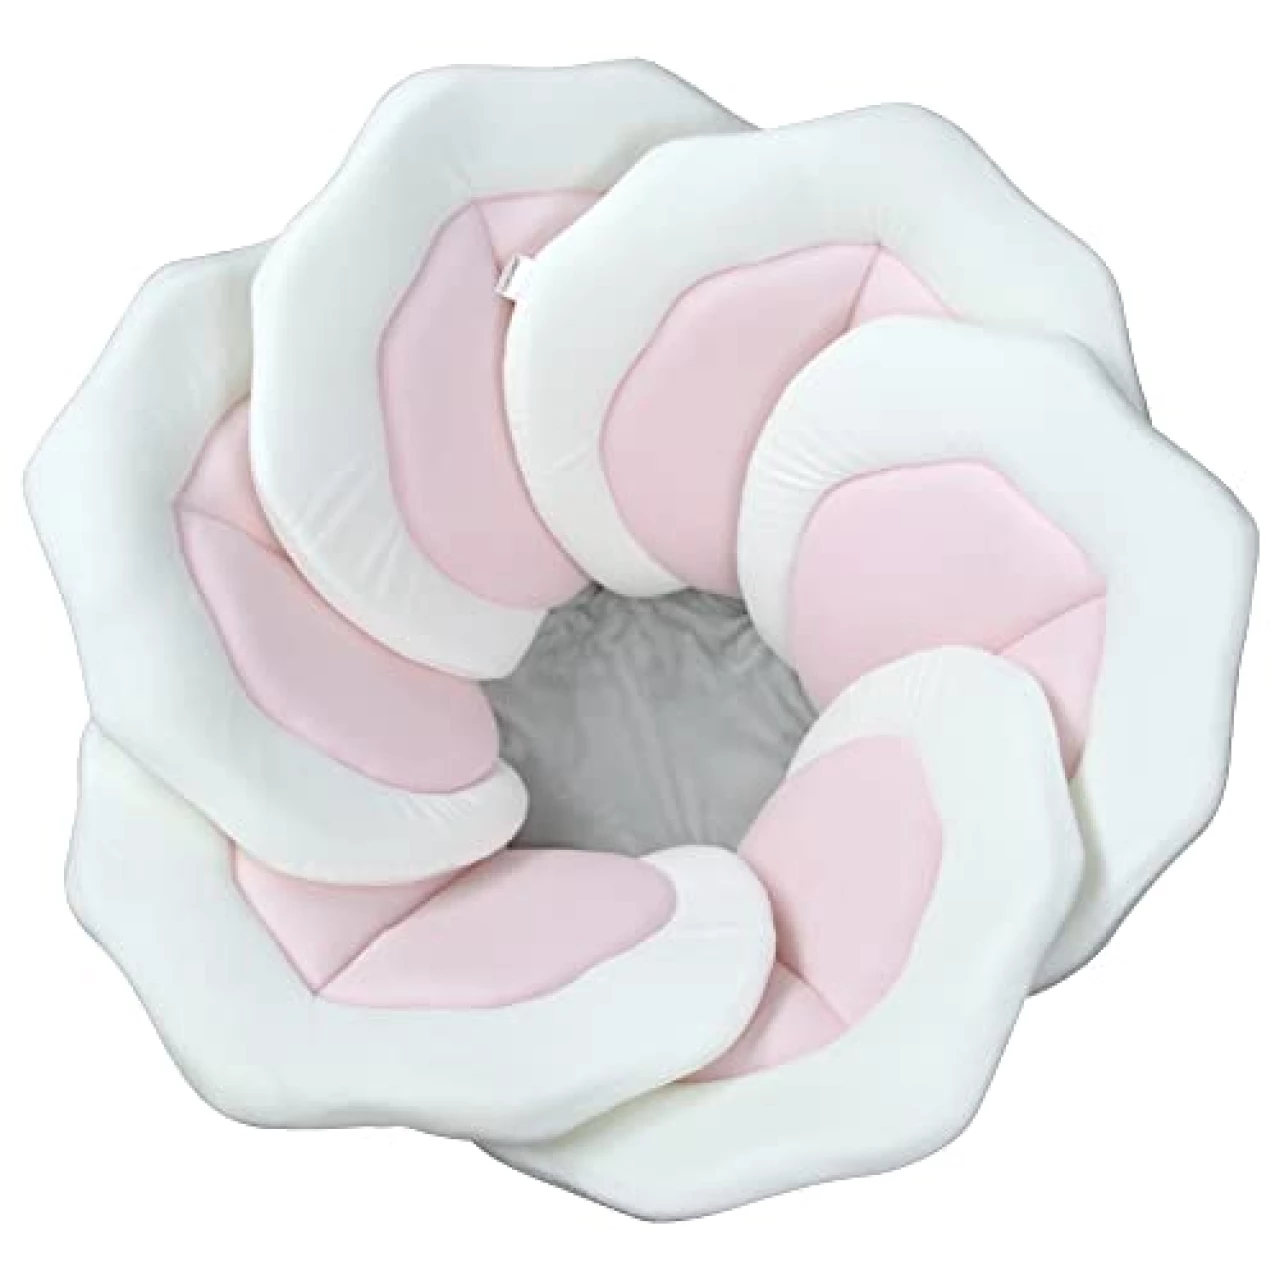 TOFOAN Baby Bath Pad for Infant Bathtub Sink Flower Mat Tub Little Lotus - Petal Soft Supports Lounger Newborn Bathing Insert Seat Baby Essentials - Baby Gifts - 31&quot; (Pink)